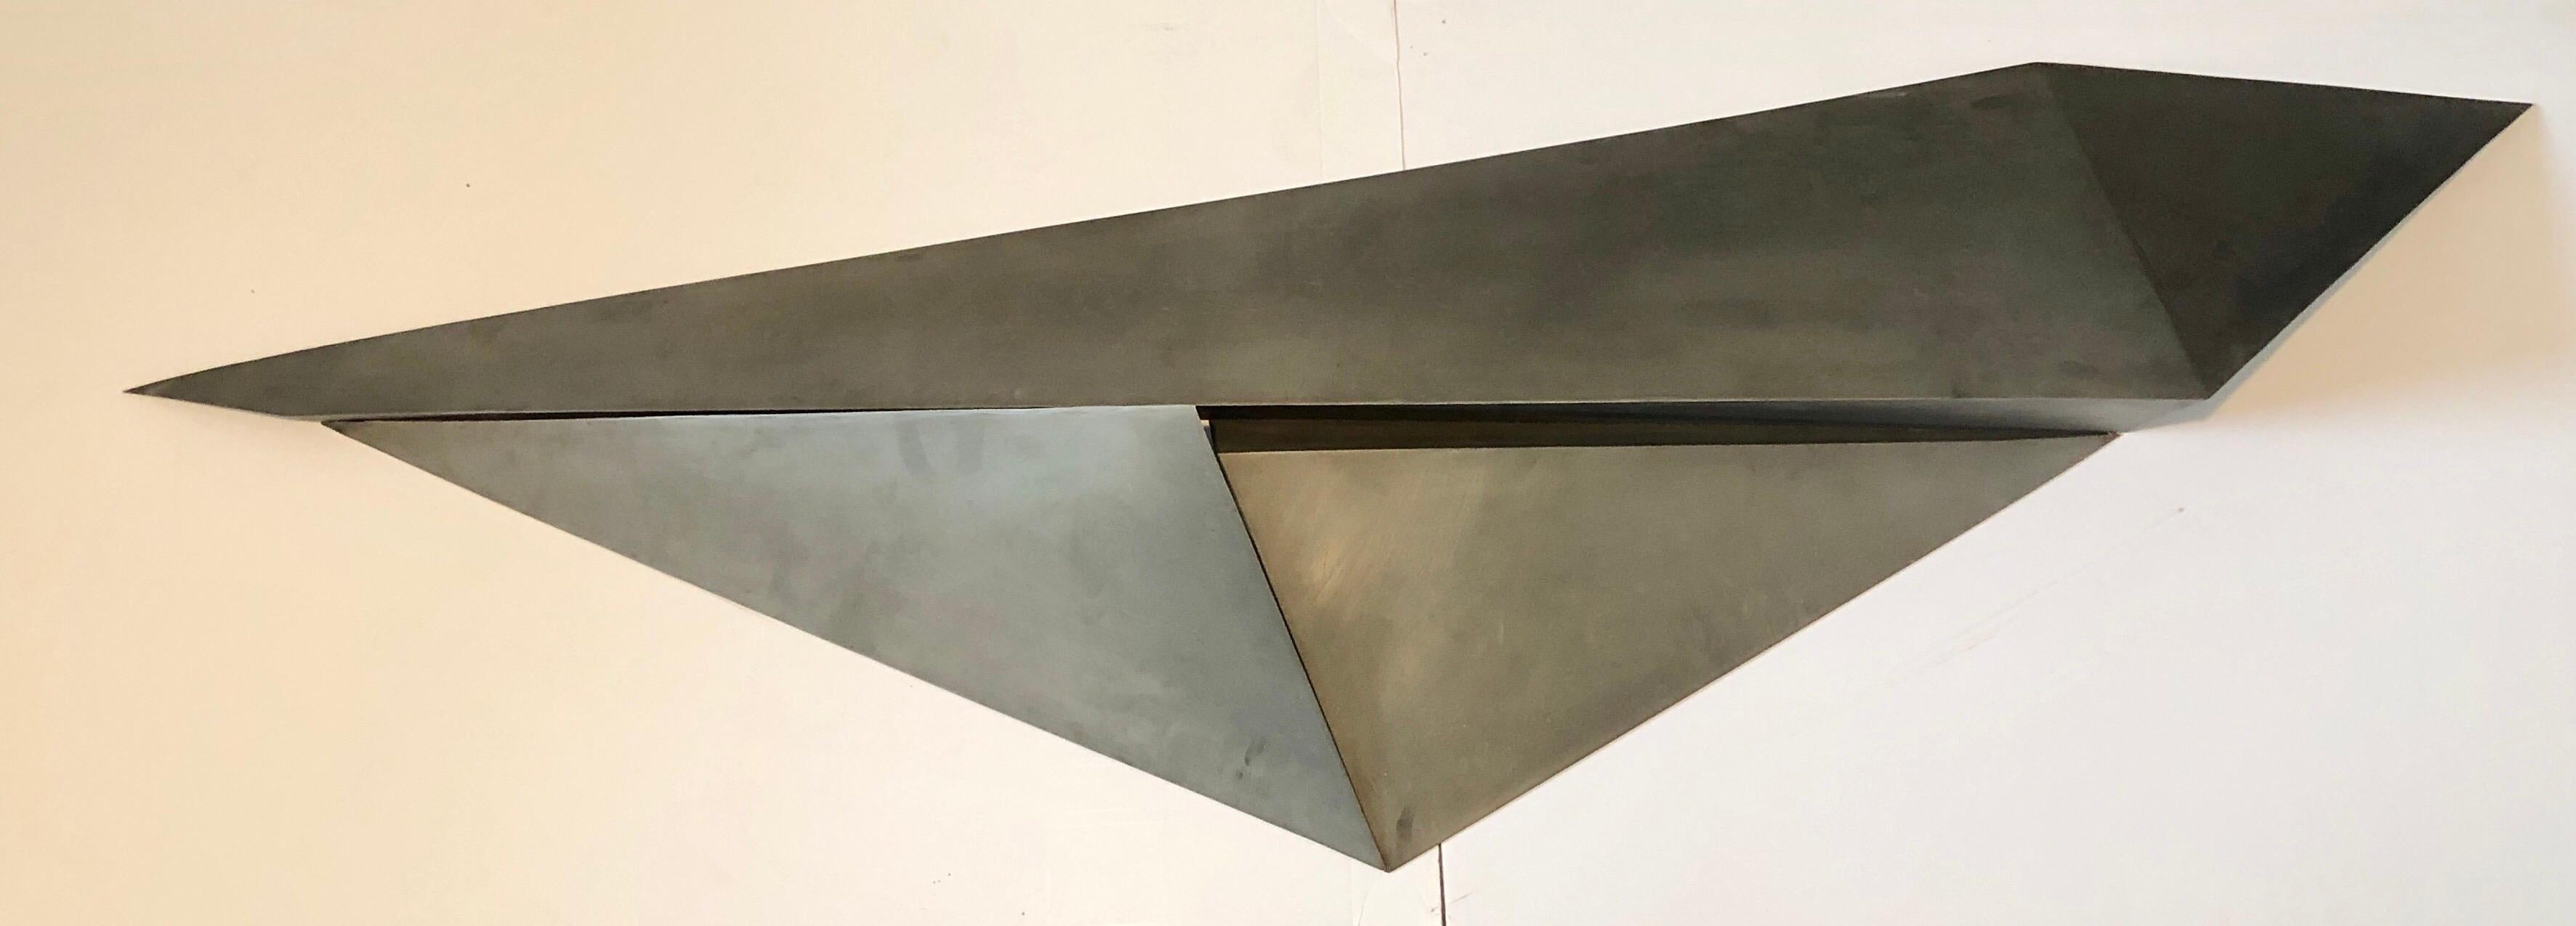 Beverly Pepper Modernist Steel Wall Sculpture Abstract Welded Geometric Origami 9